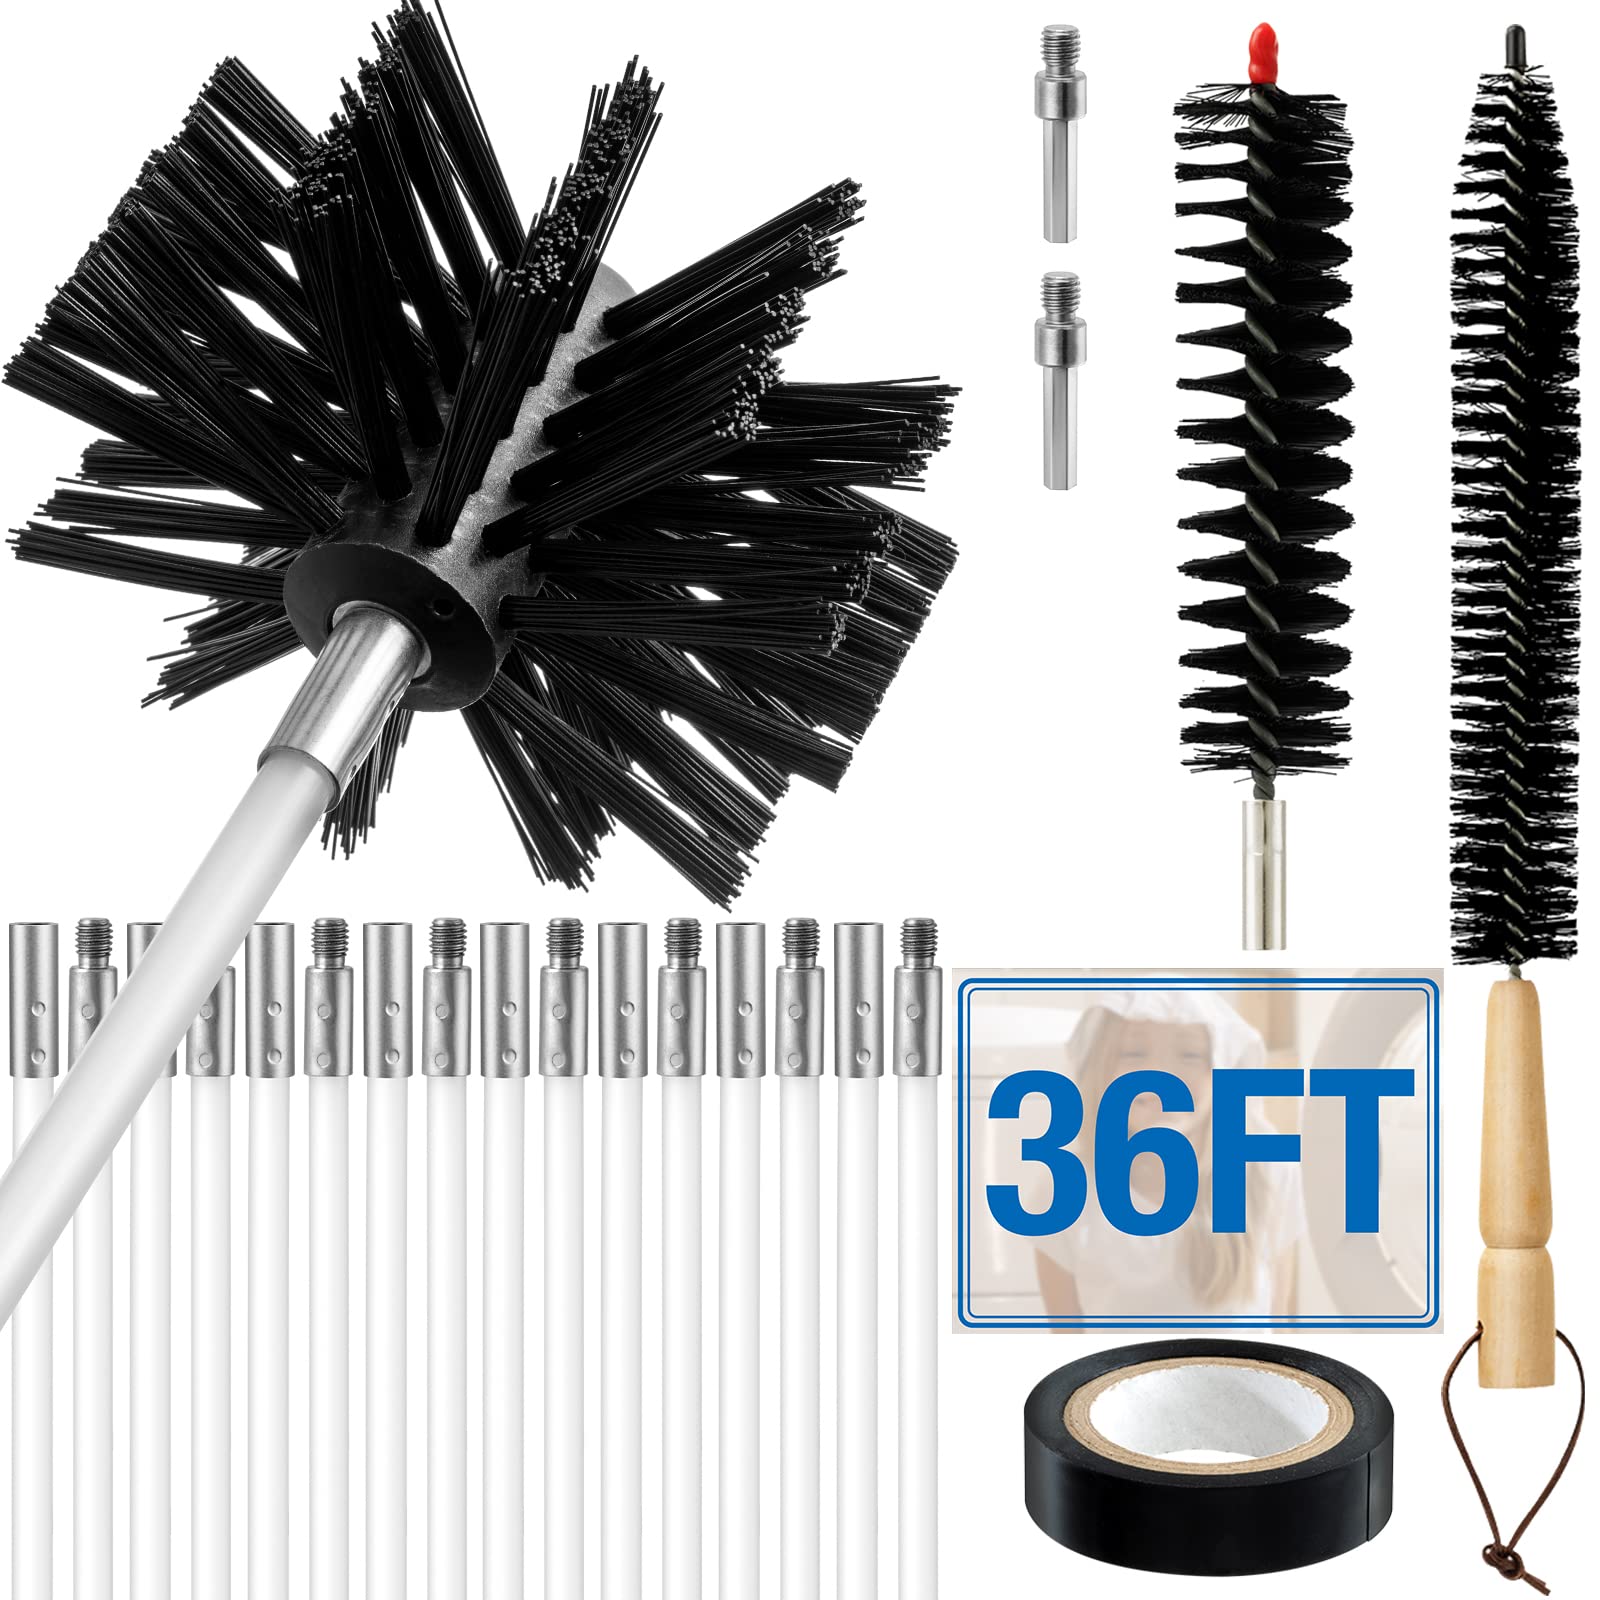 Cleaning Brush For Dryer Lint Or Refrigerator Coil Cleaning (Pack